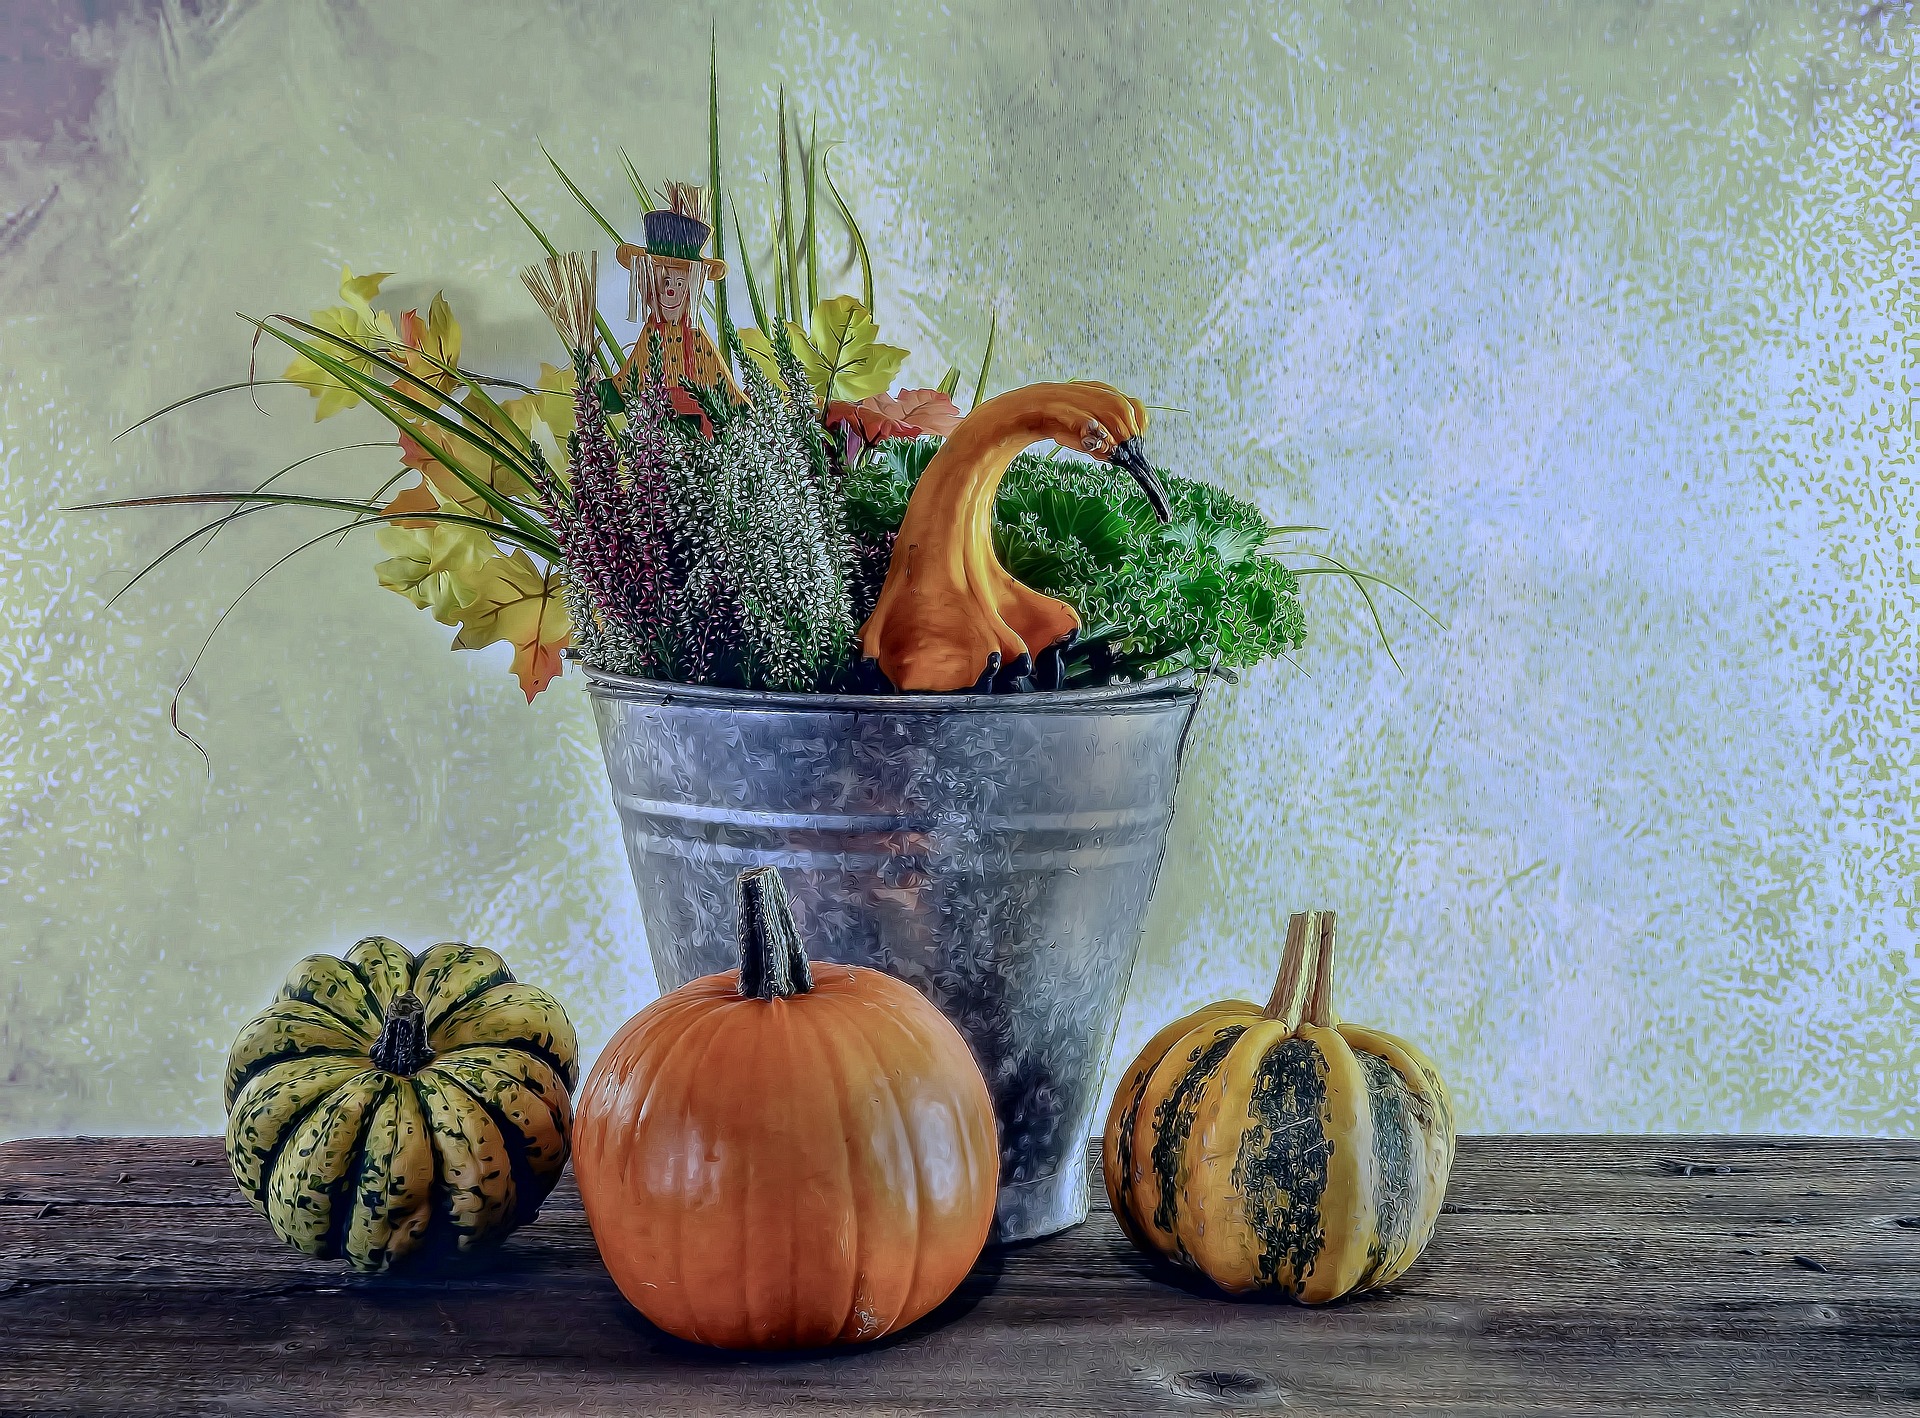 A metal watering pail holds fall greenery and herbs, and three small gourds sit on the wooden table at its base.